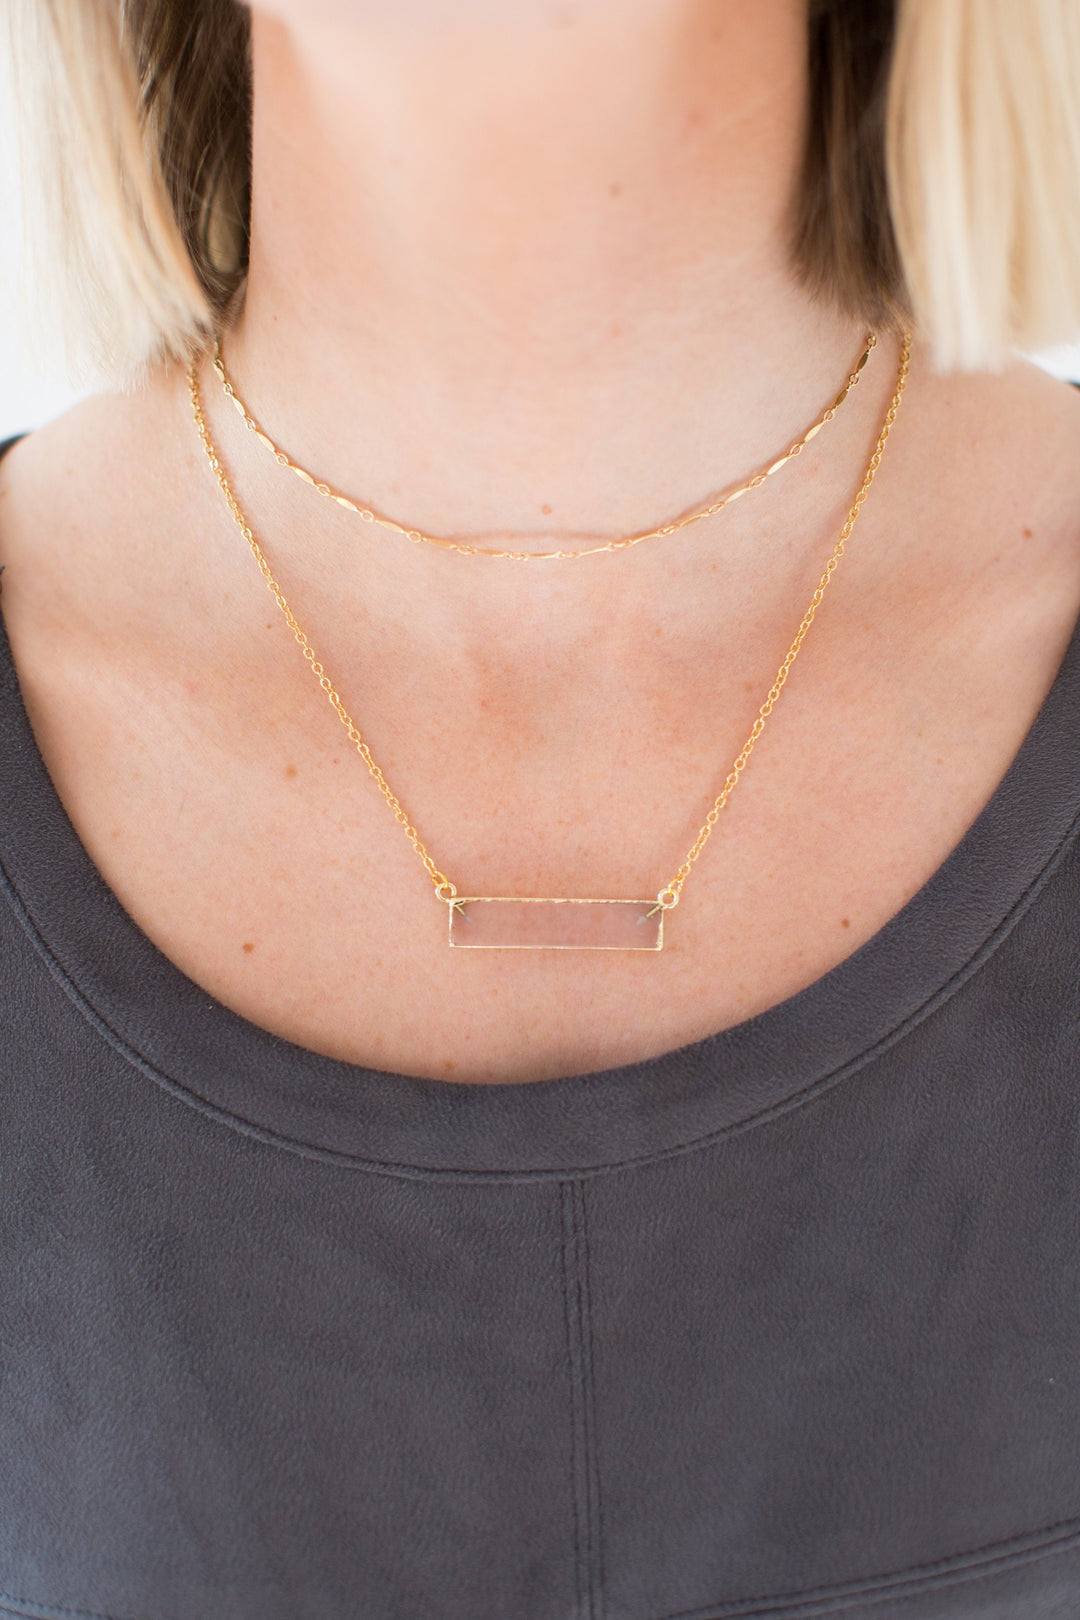 A woman with short blonde hair is wearing a gray dress by vici and two layered necklaces; one is a gold fill choker chain and the other is a clear quartz bar necklace made by Meghan Bo Designs. 